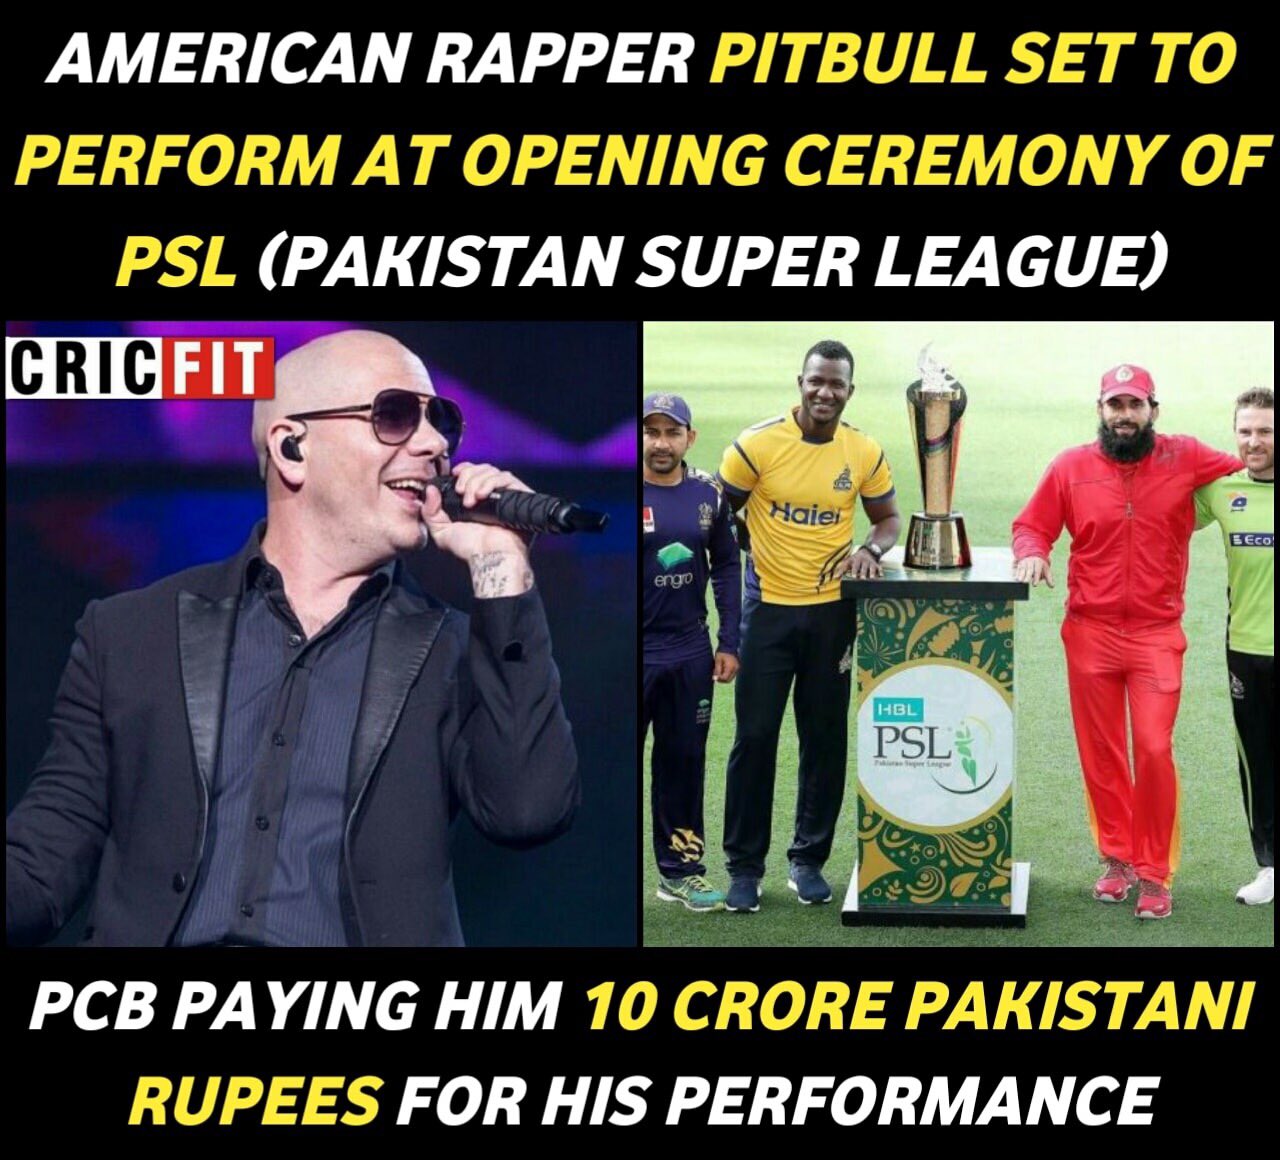 Pakistan Super League 2019: American rapper Pitbull not performing at the  opening ceremony of PSL- Here's why